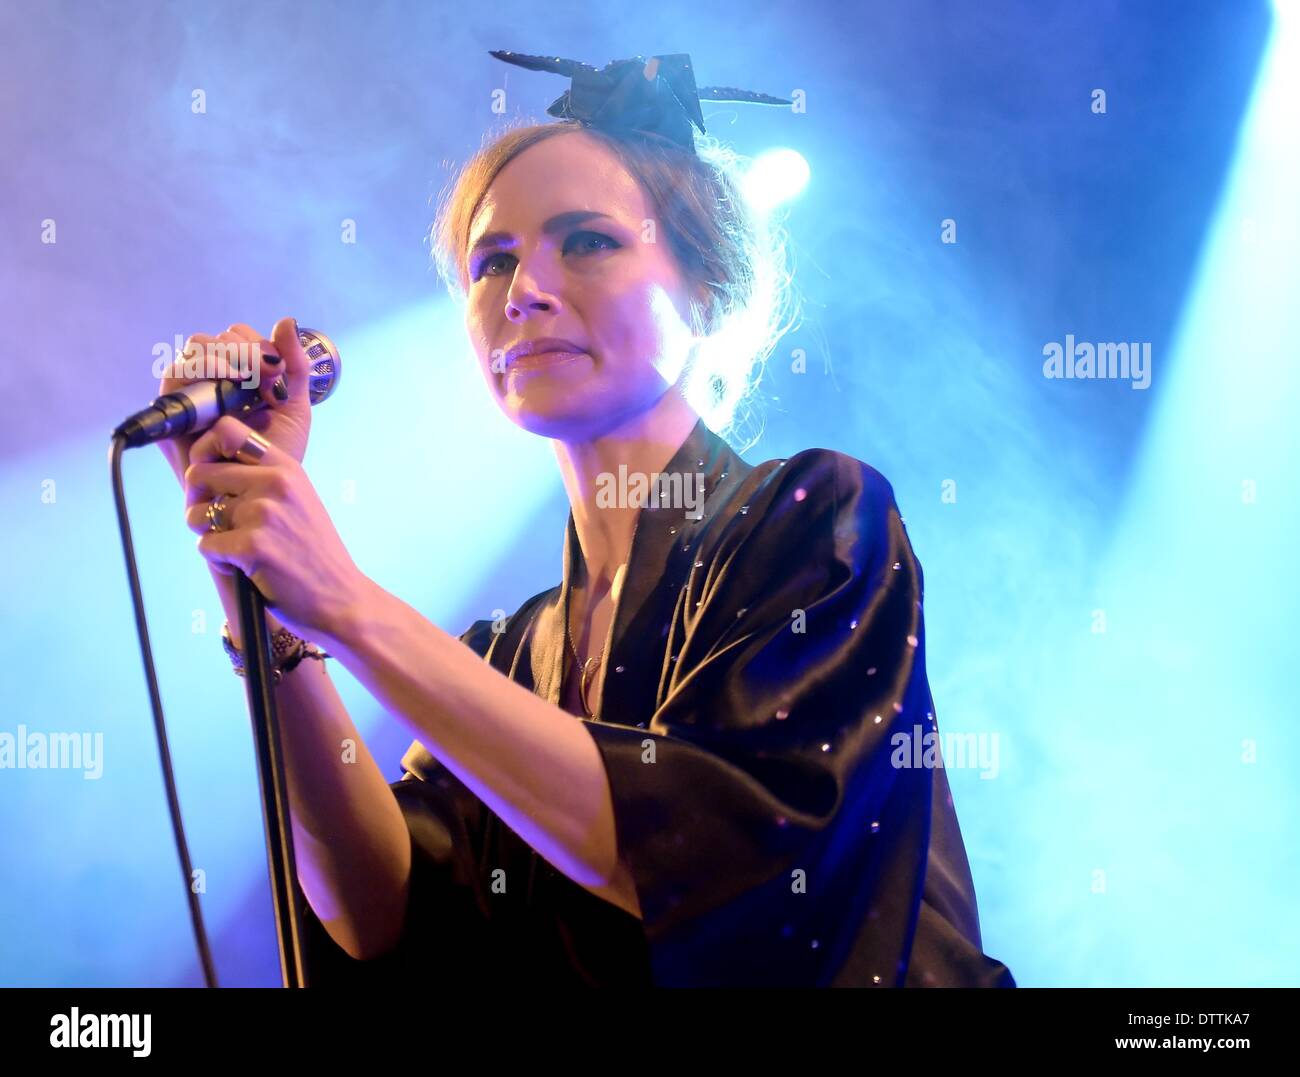 Berlin, Germany. 23rd Feb, 2014. Swedish singer Nina Persson performs on stage at Heimathafen in Berlin, Germany, 23 February 2014. She presented her new album 'Animal Heart'. Photo: Britta Pedersen/dpa/Alamy Live News Stock Photo